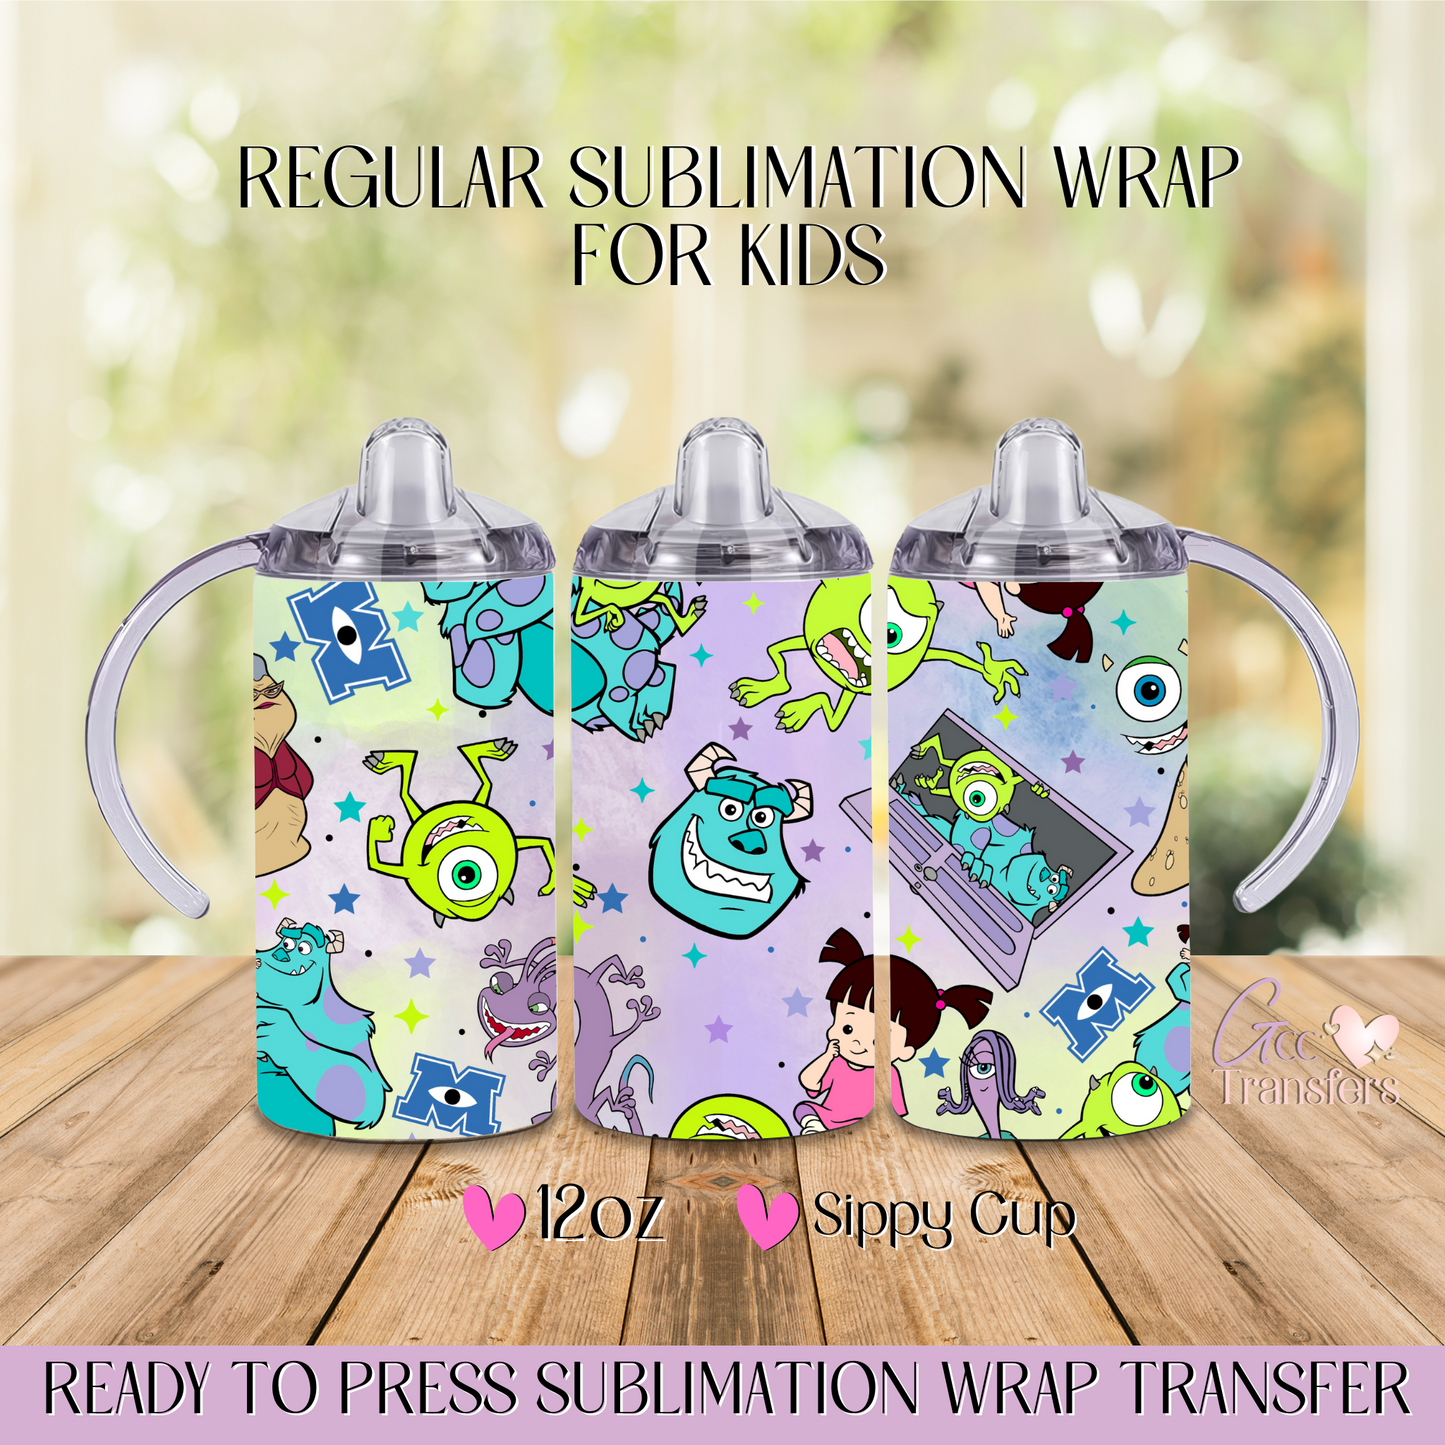 Mosters Cartoon Character - 12oz Regular Sublimation Wrap